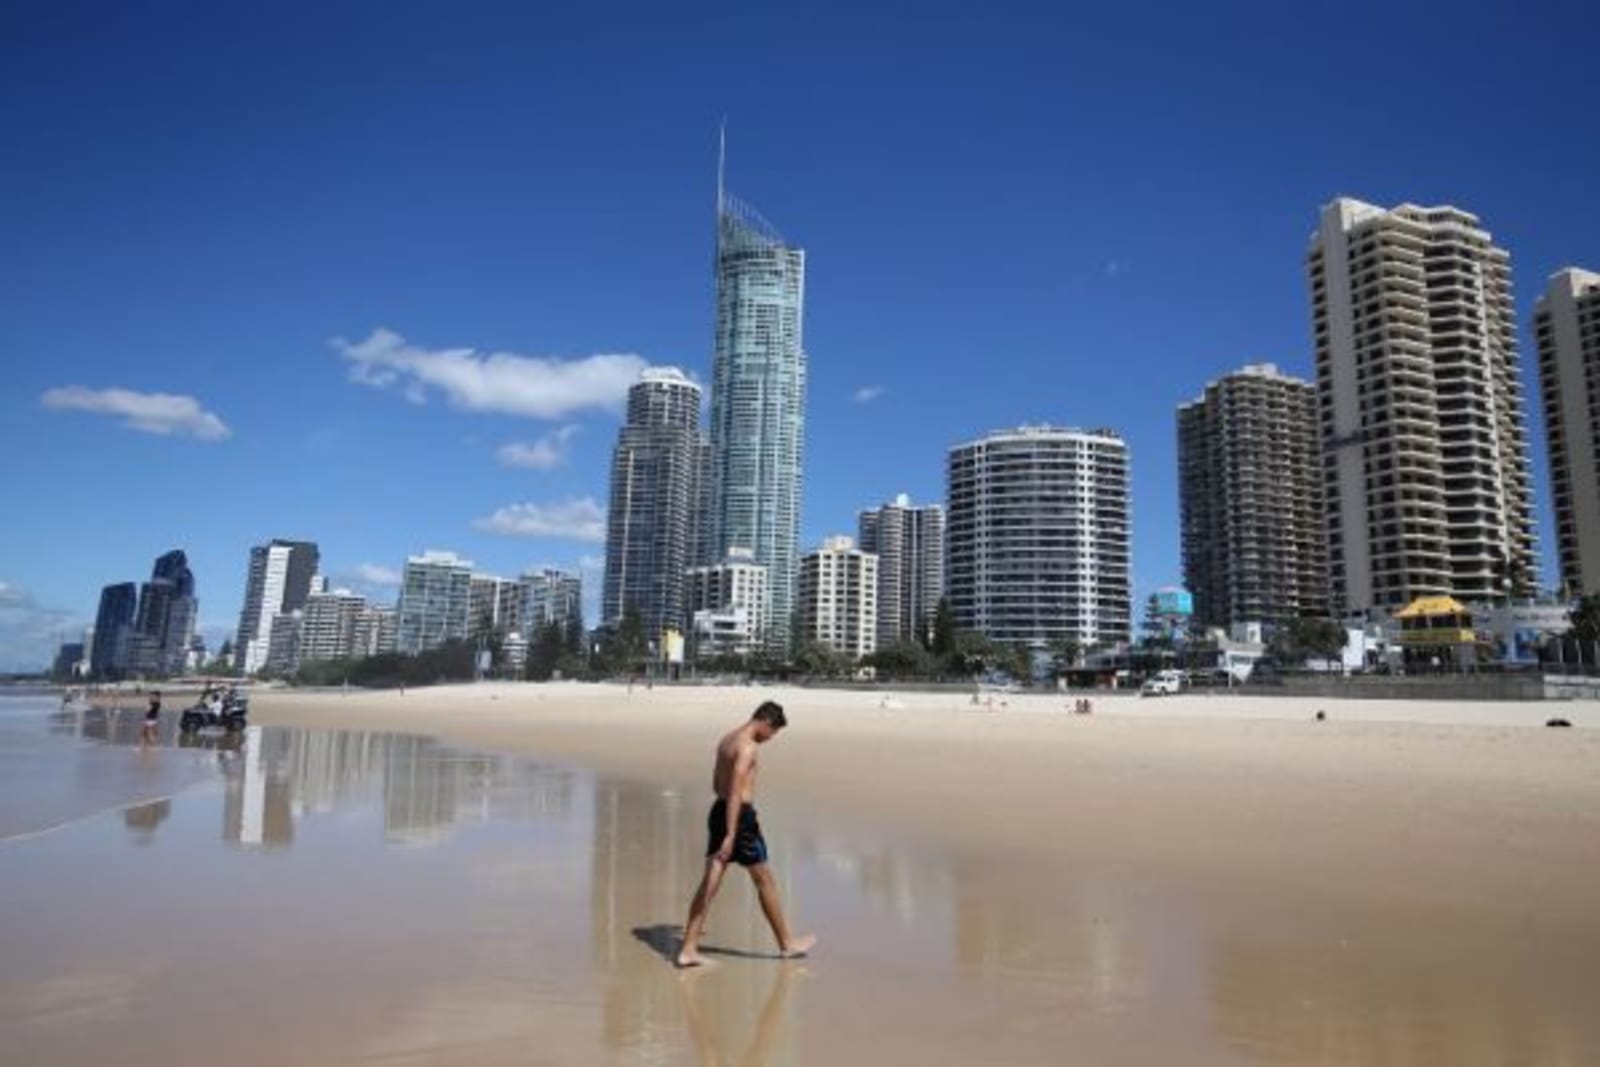 Man walking out of the surf towards beach and skyscrapers